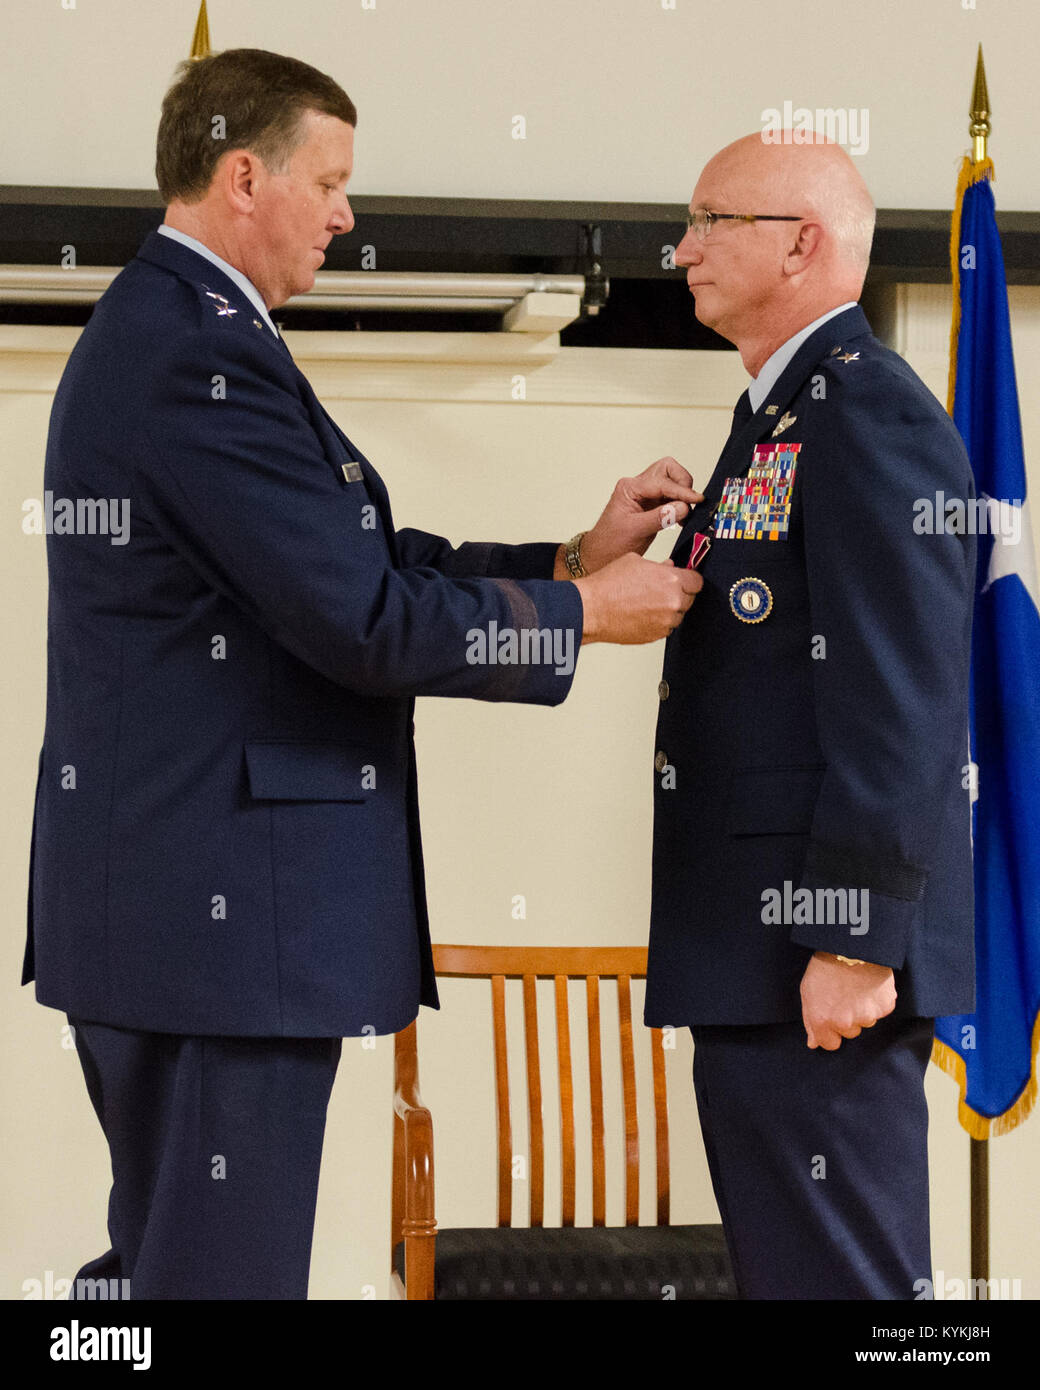 Brig. Gen. Mark Kraus (right), a Kentucky Air National Guardsman who serves as Air National Guard assistant to the commander of U.S. Air Forces Central, is awarded The Legion of Merit, first oak leaf cluster, by Kentucky’s adjutant general, Maj. Gen. Edward Tonini, during a ceremony held Aug. 18, 2013, at the Kentucky Air National Guard Base in Louisville, Ky. Kraus also was promoted to the rank of major general during the ceremony. (U.S. Air National Guard photo by Airman Joshua Horton) Stock Photo